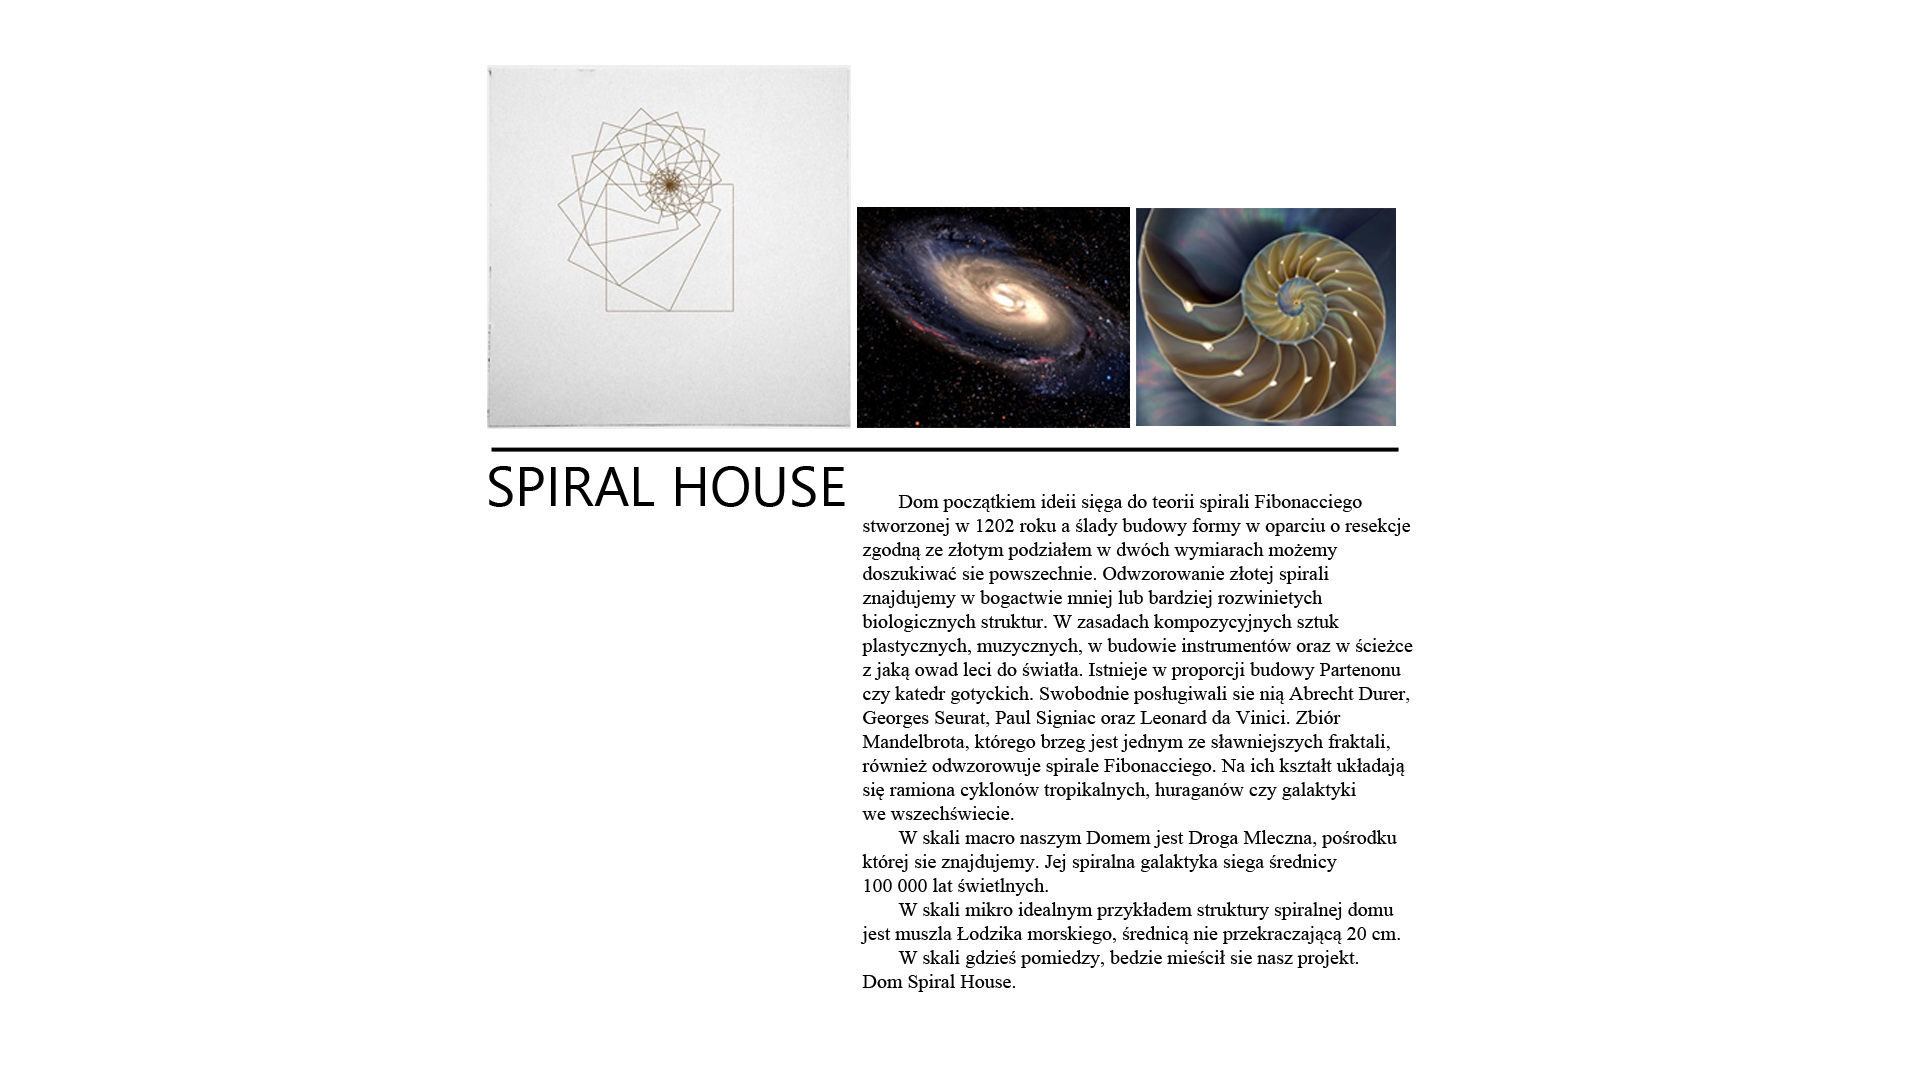 Spiral House - opis